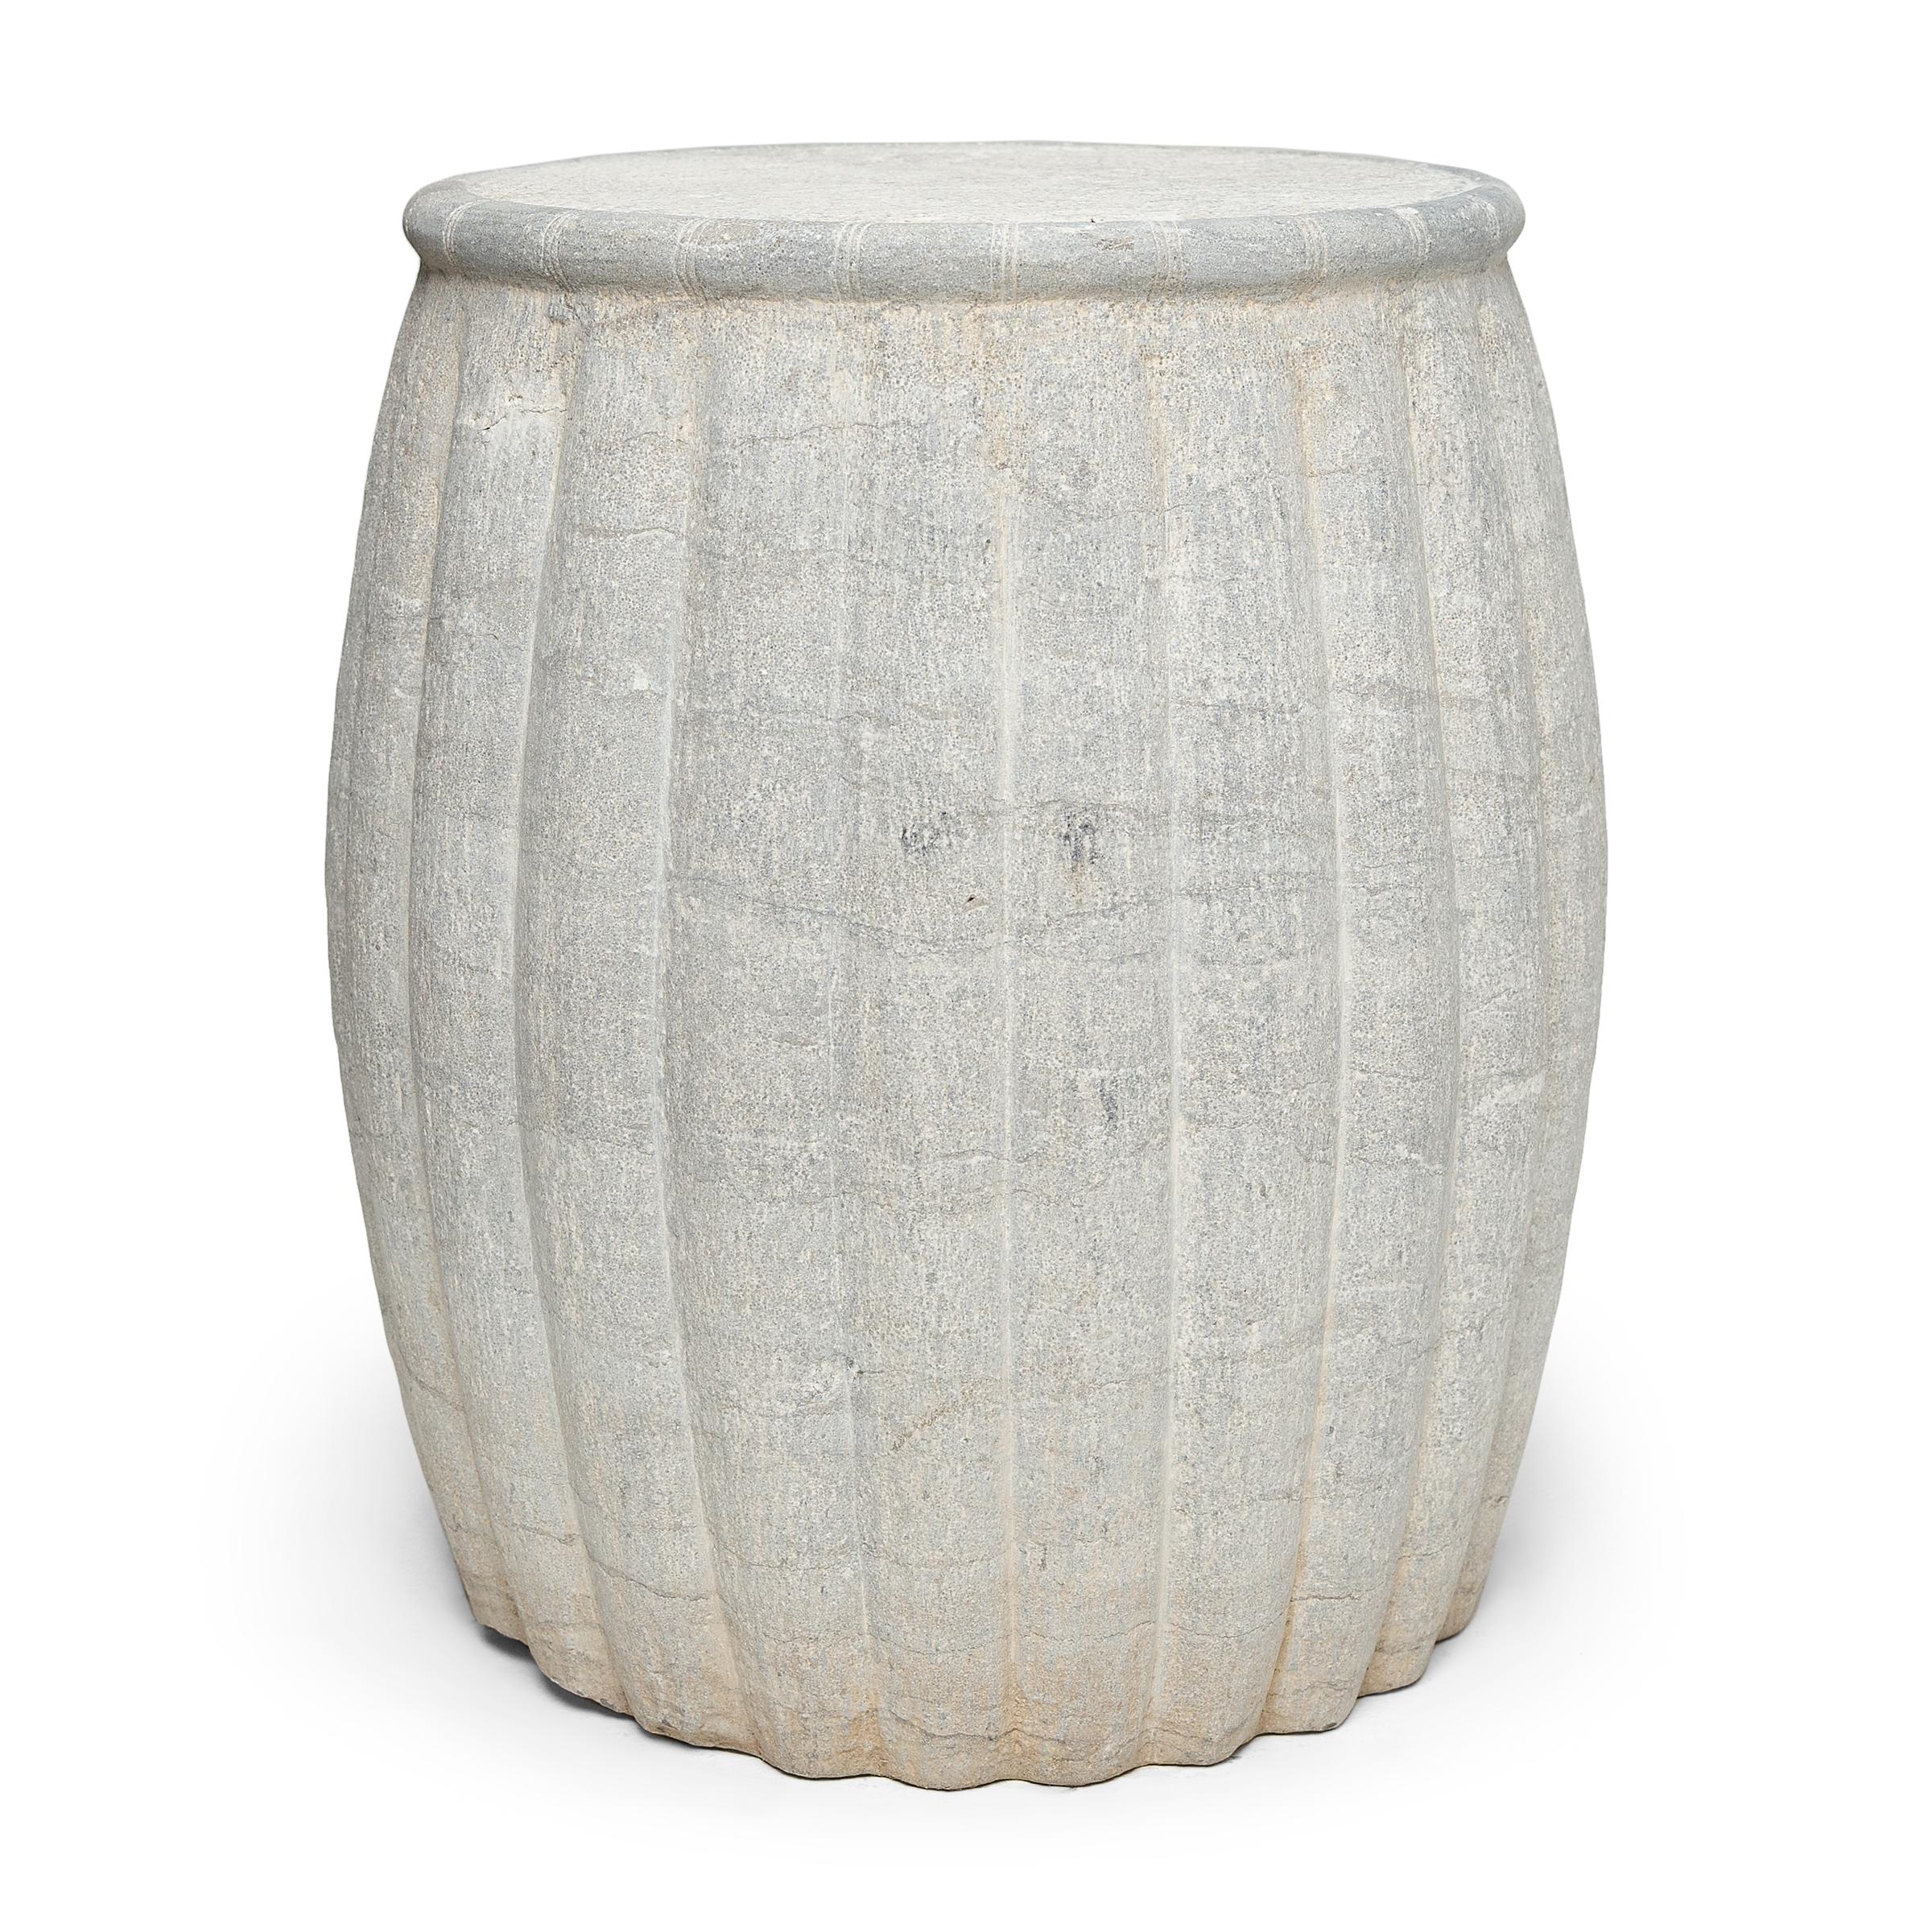 This large stone drum stool was carved from solid limestone with a ribbed texture suggestive of a squash or melon, traditional symbols of longevity and perpetuity. The drum-form stool swells with gently tapered sides and a flattened top bordered by